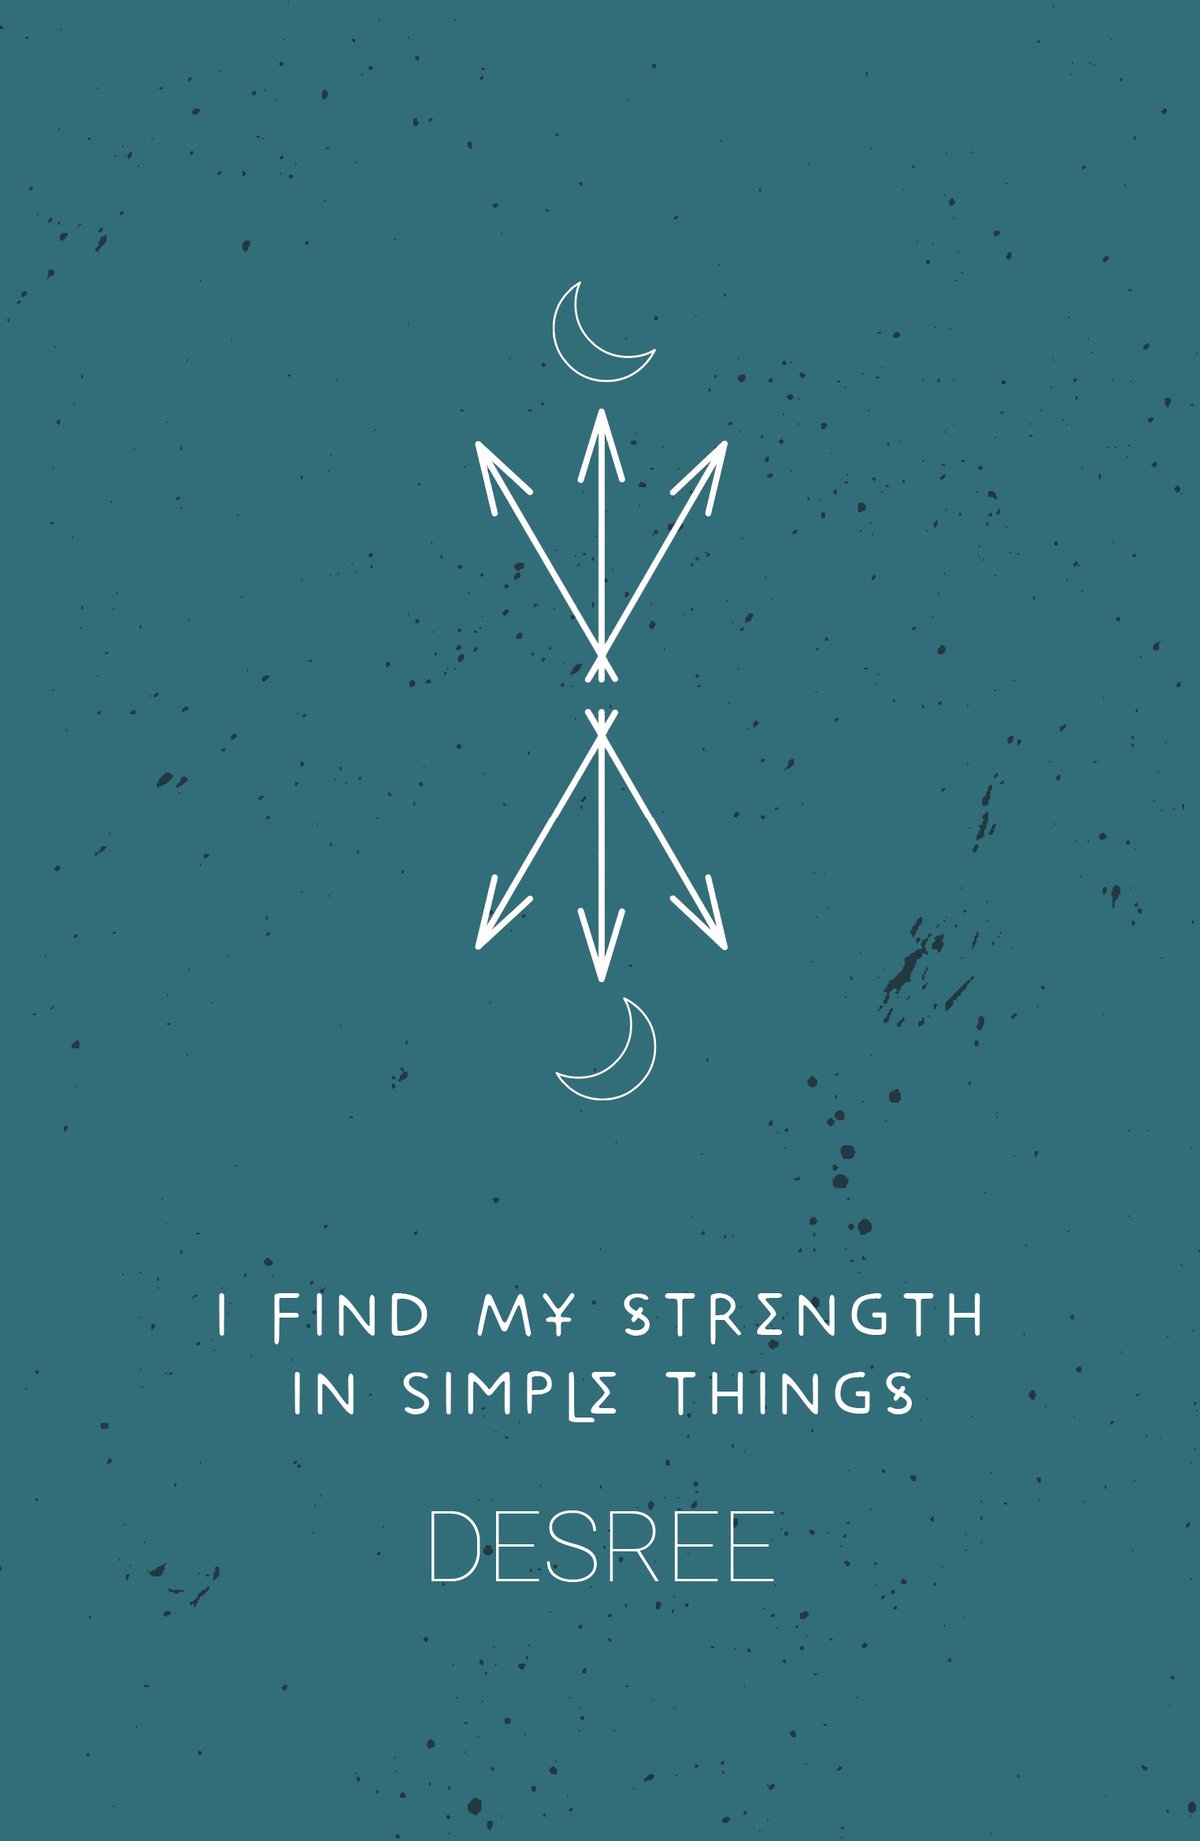 Image of I Find My Strength in Simple Things by Desree